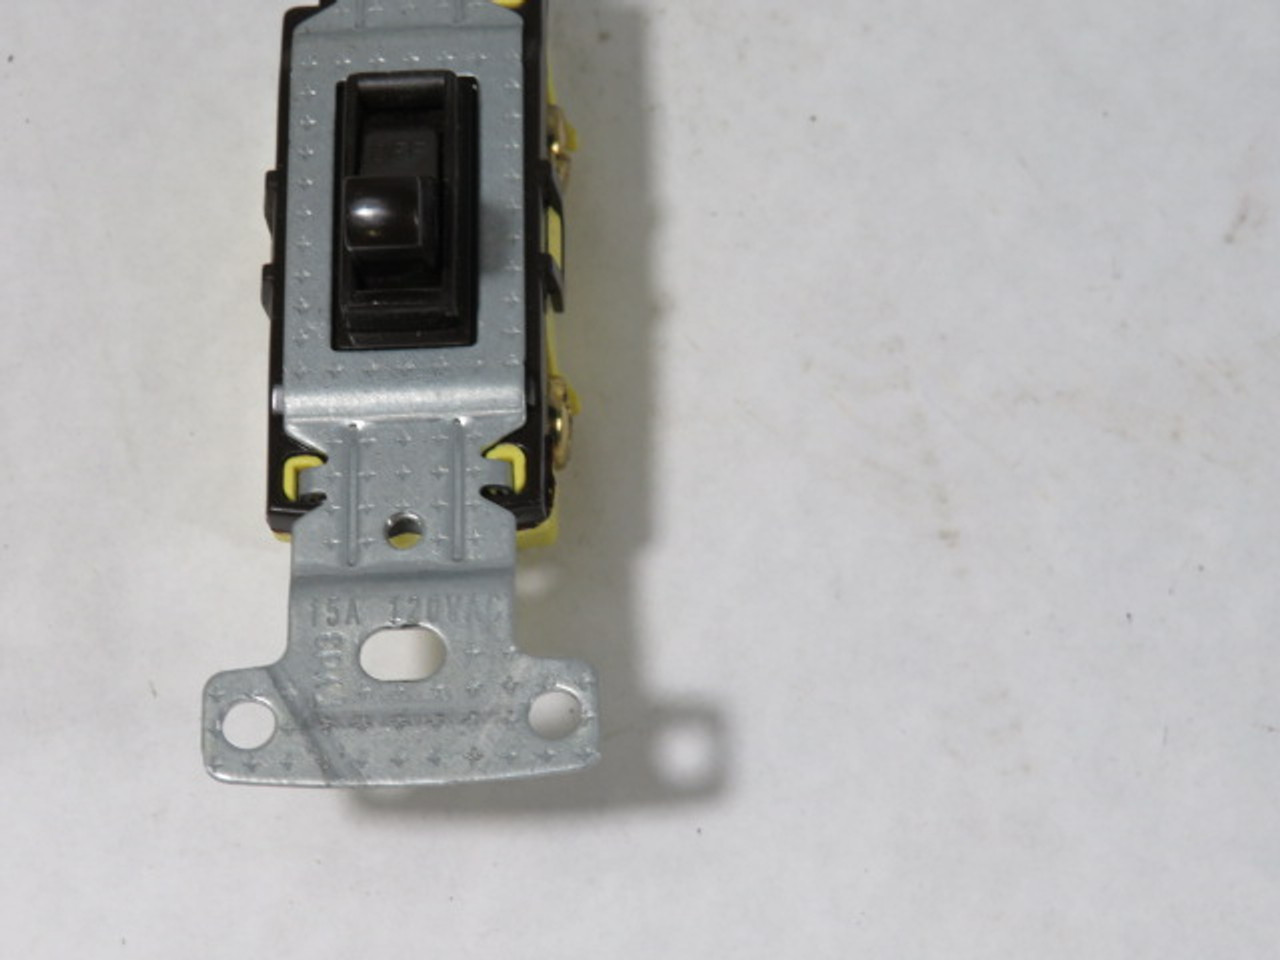 Hubbell RS315 15A 120VAC 3 Way Light Switch Yellow USED